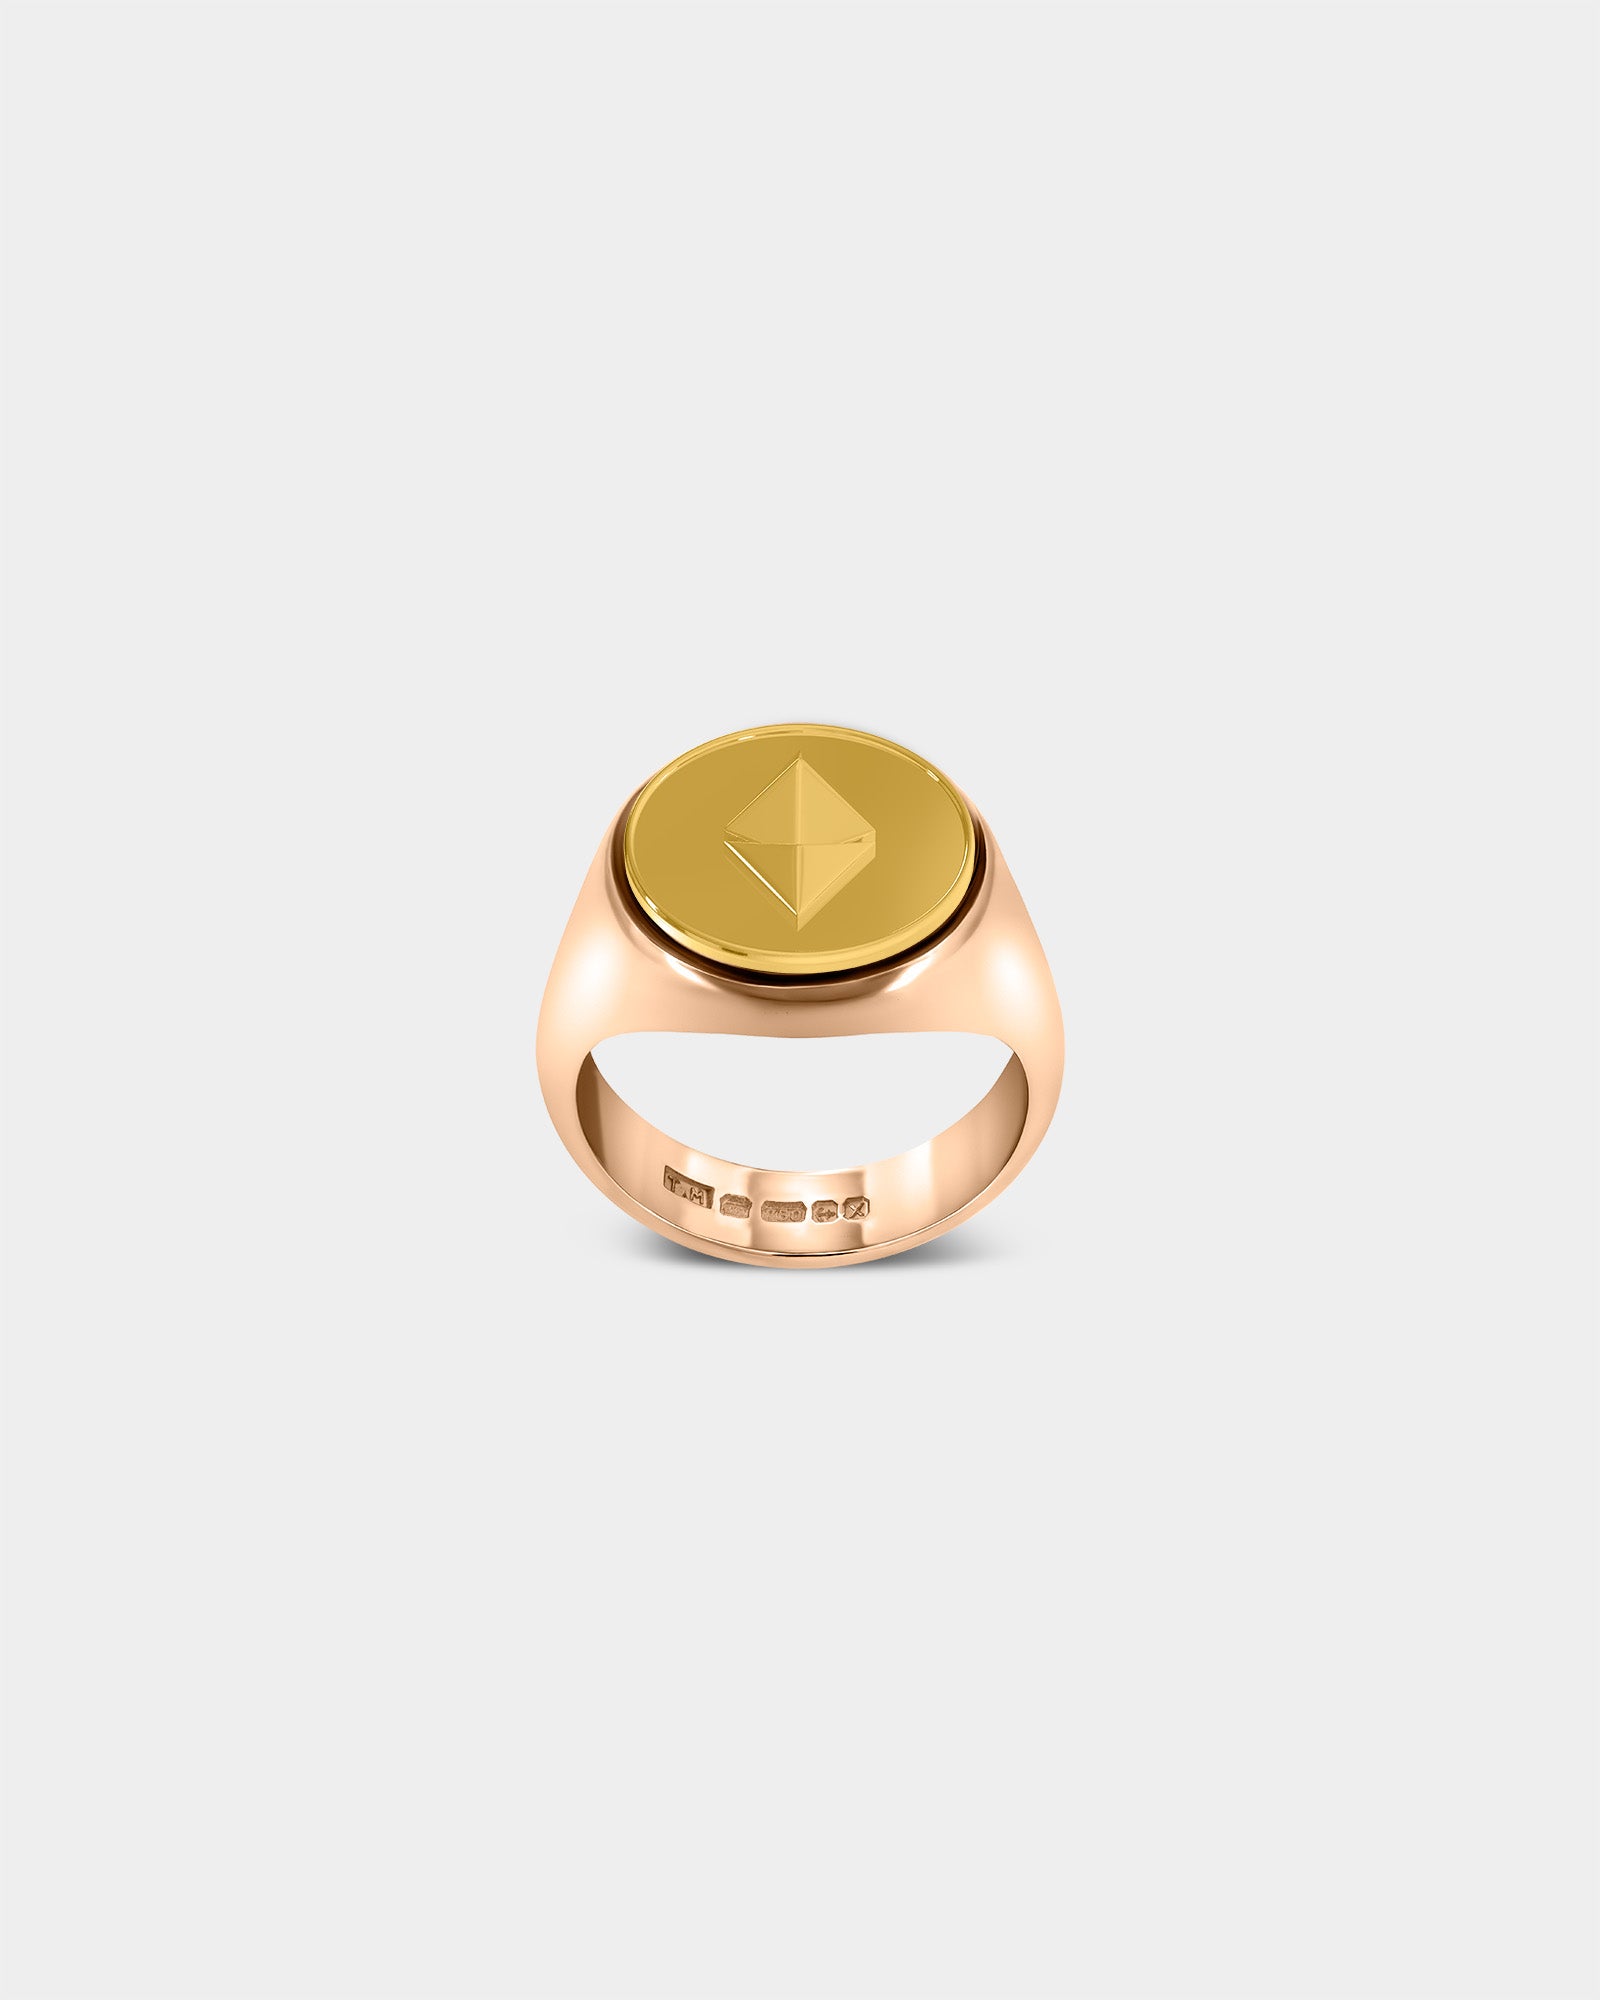 Large Ethereum Crypto Ring in 9k Rose Gold / 9k Yellow Gold by Wilson Grant